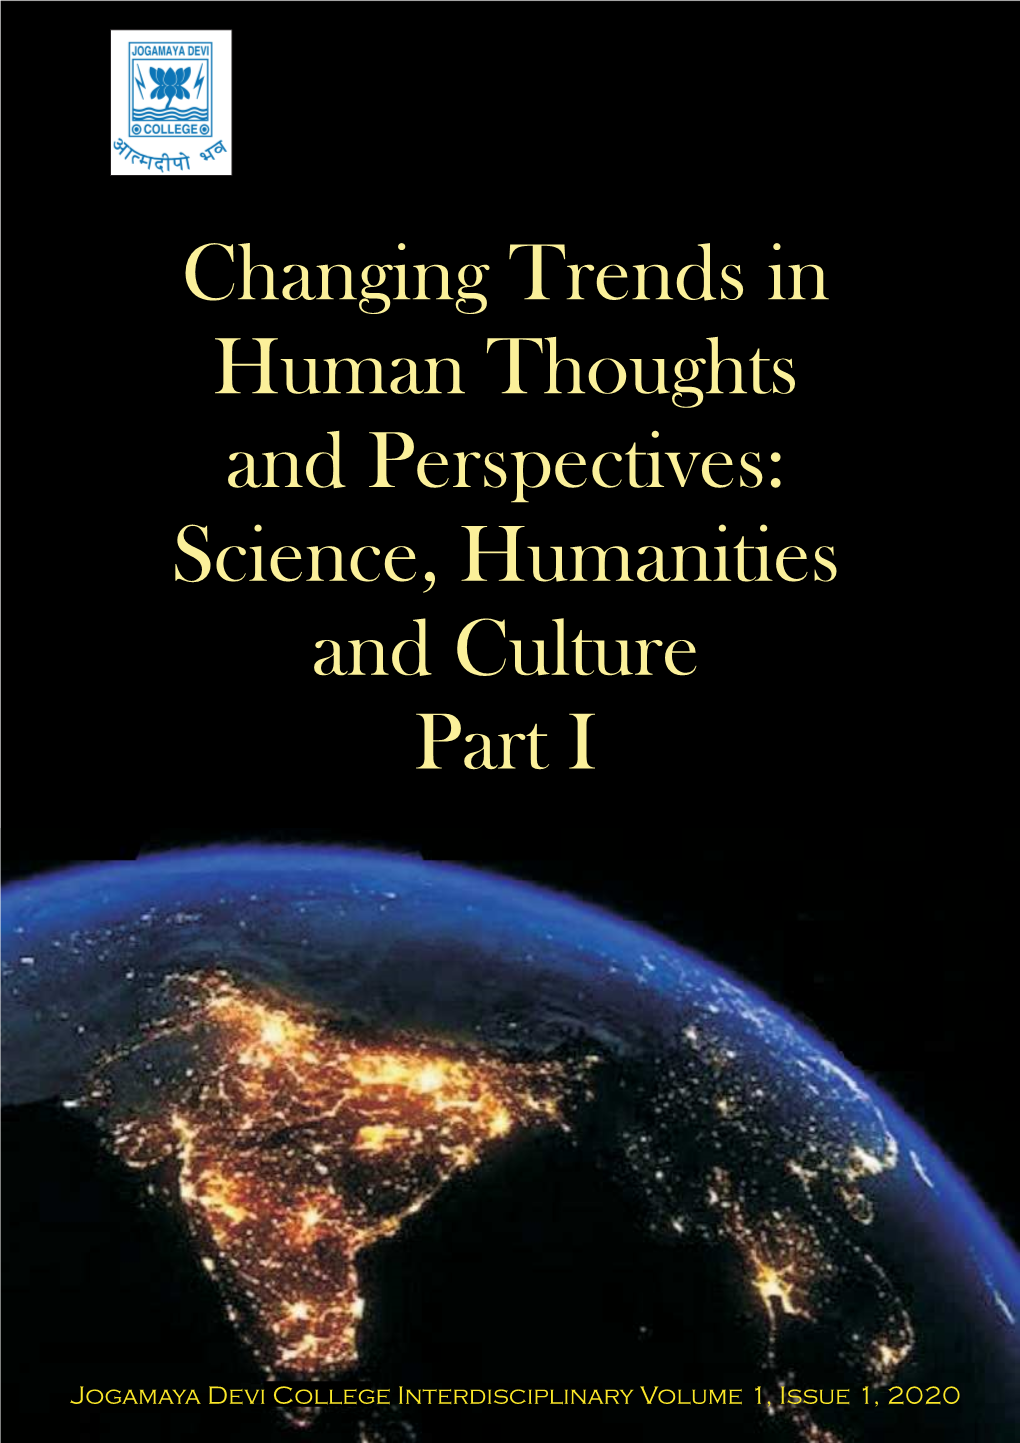 Changing Trends in Human Thoughts and Perspectives: Science, Humanities and Culture, Part I, Jogamaya Devi College Interdisciplinary Volume 1, Issue 1 (2020)